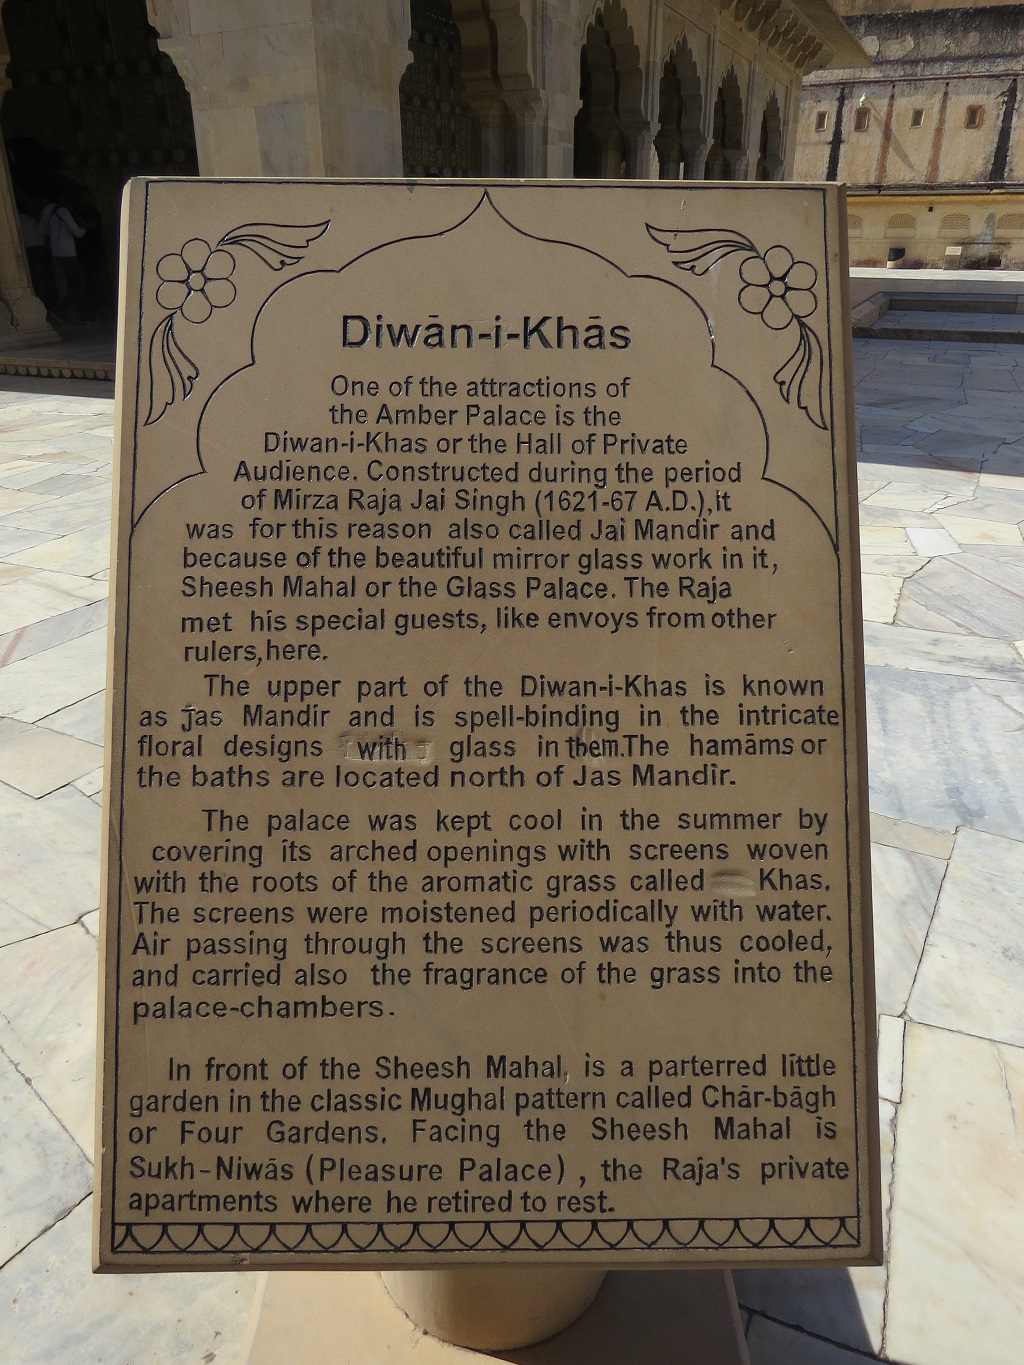 About: Diwan-i-Khas – The Hall of Private Audience